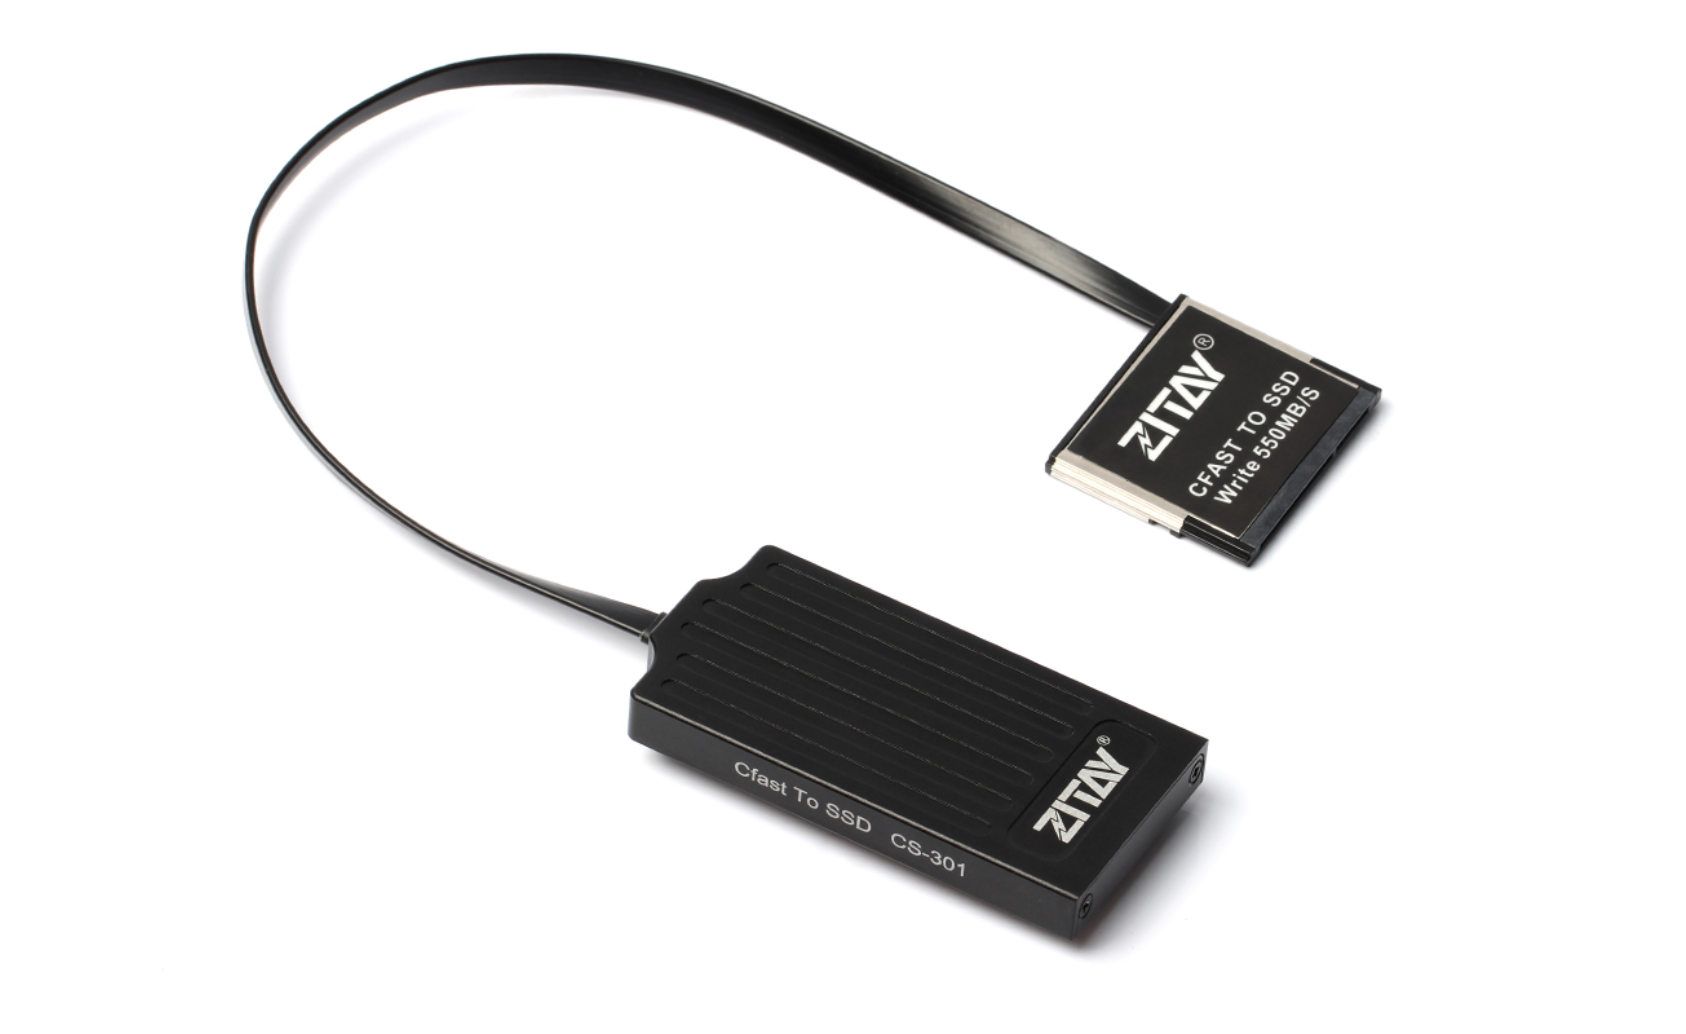 ZITAY CFast 2.0 Dummy Card to MSATA SSD Adapter - Newsshooter